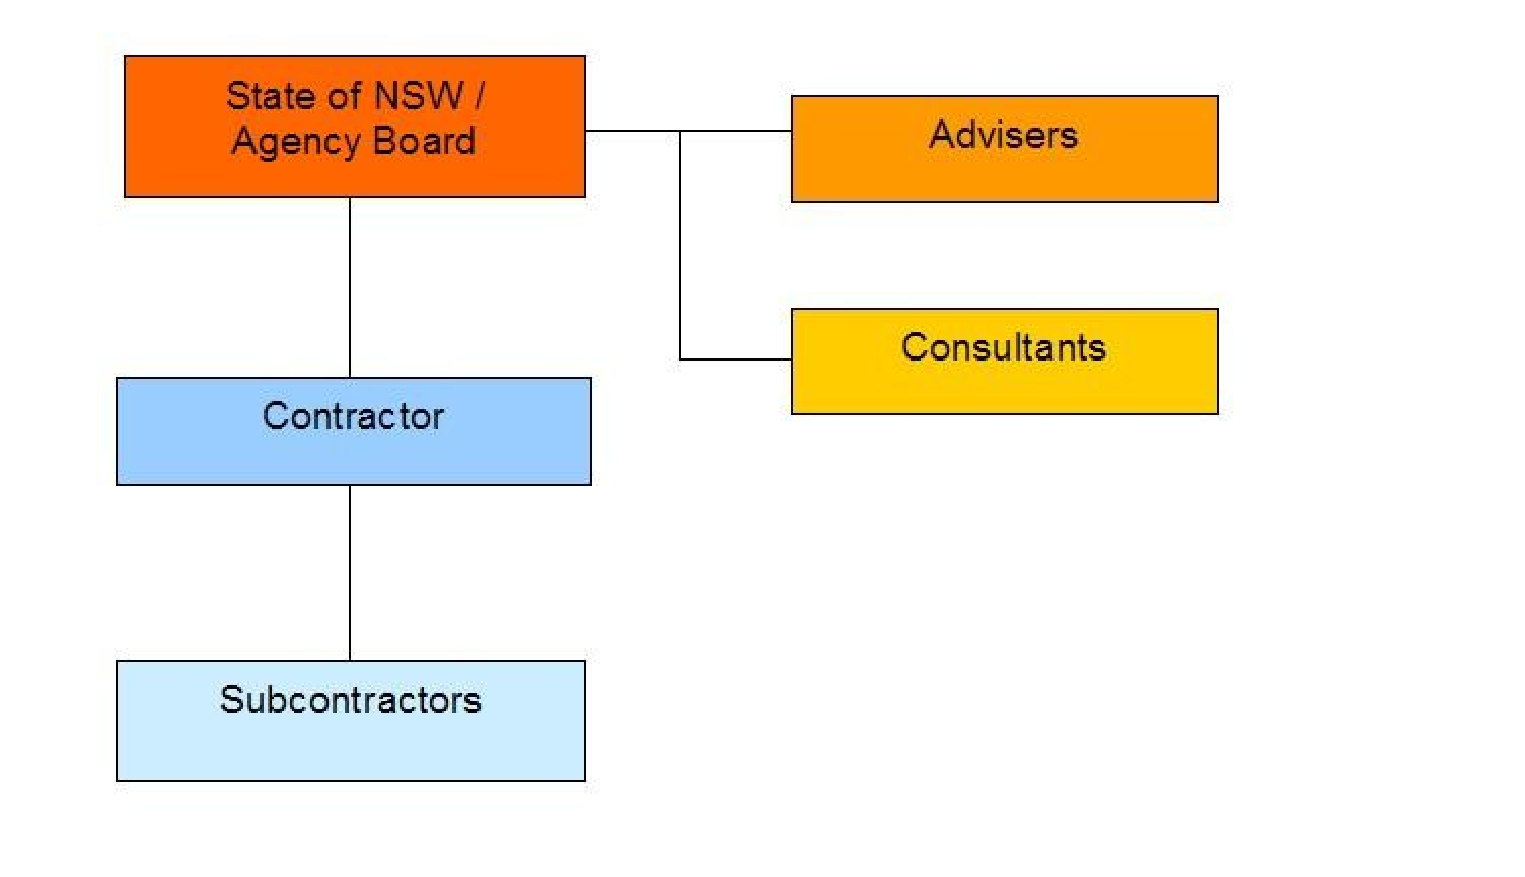 Advisers, consultants and contractors report to the State of NSW/agency board, while subcontractors report to contractor